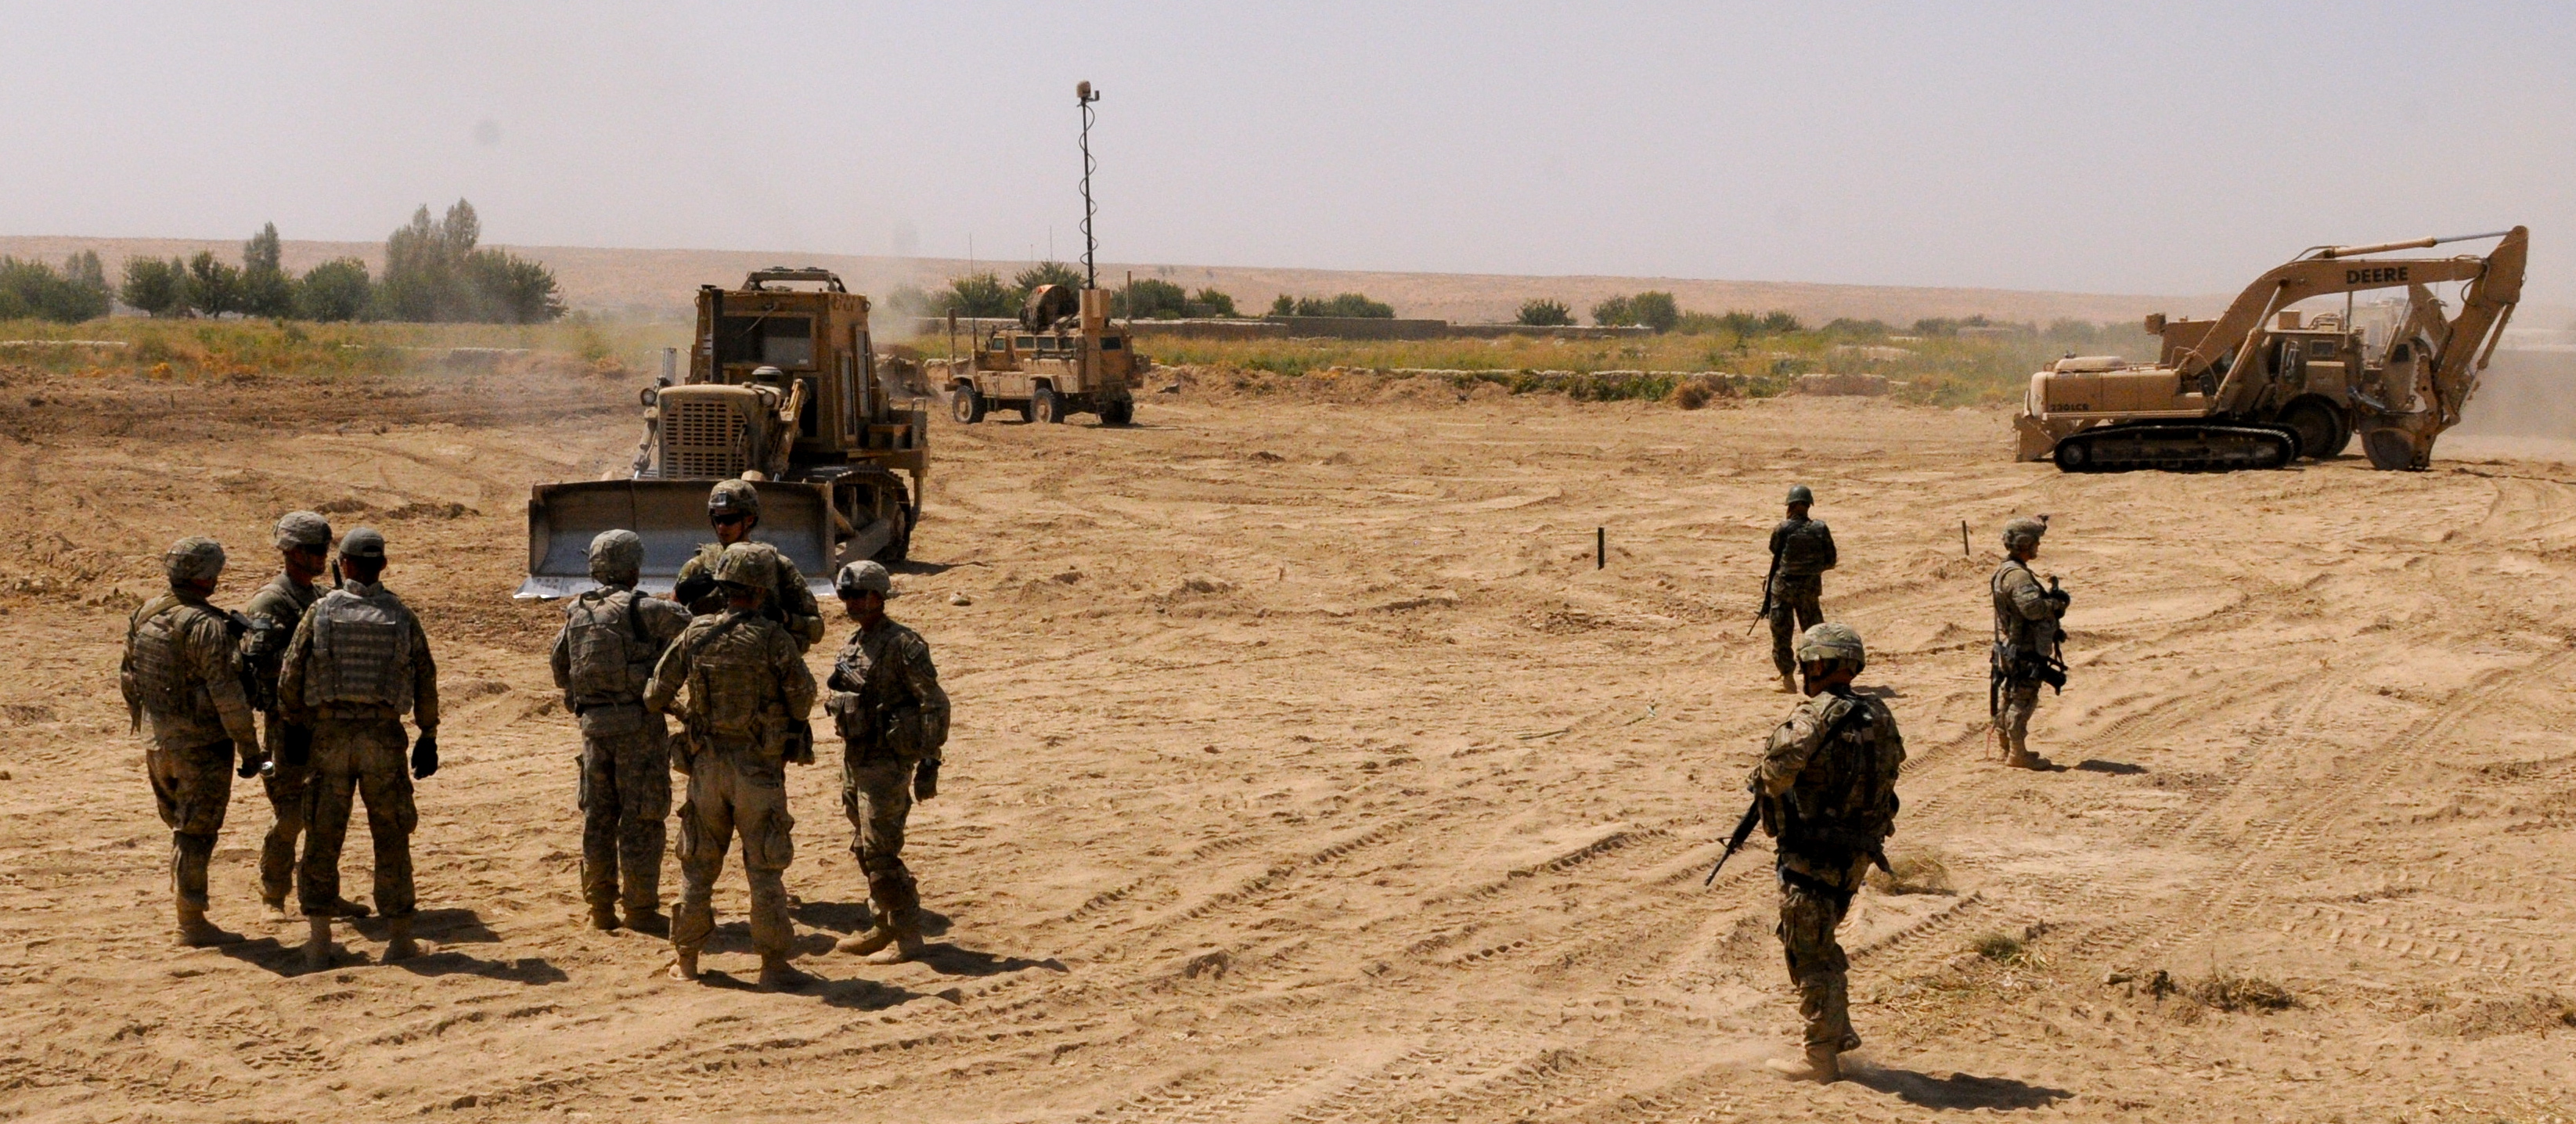 US soldiers and bulldozers clear and improve Route Agha in Afghanistan (Arctic Wolves/Flickr/CC BY 2.0)